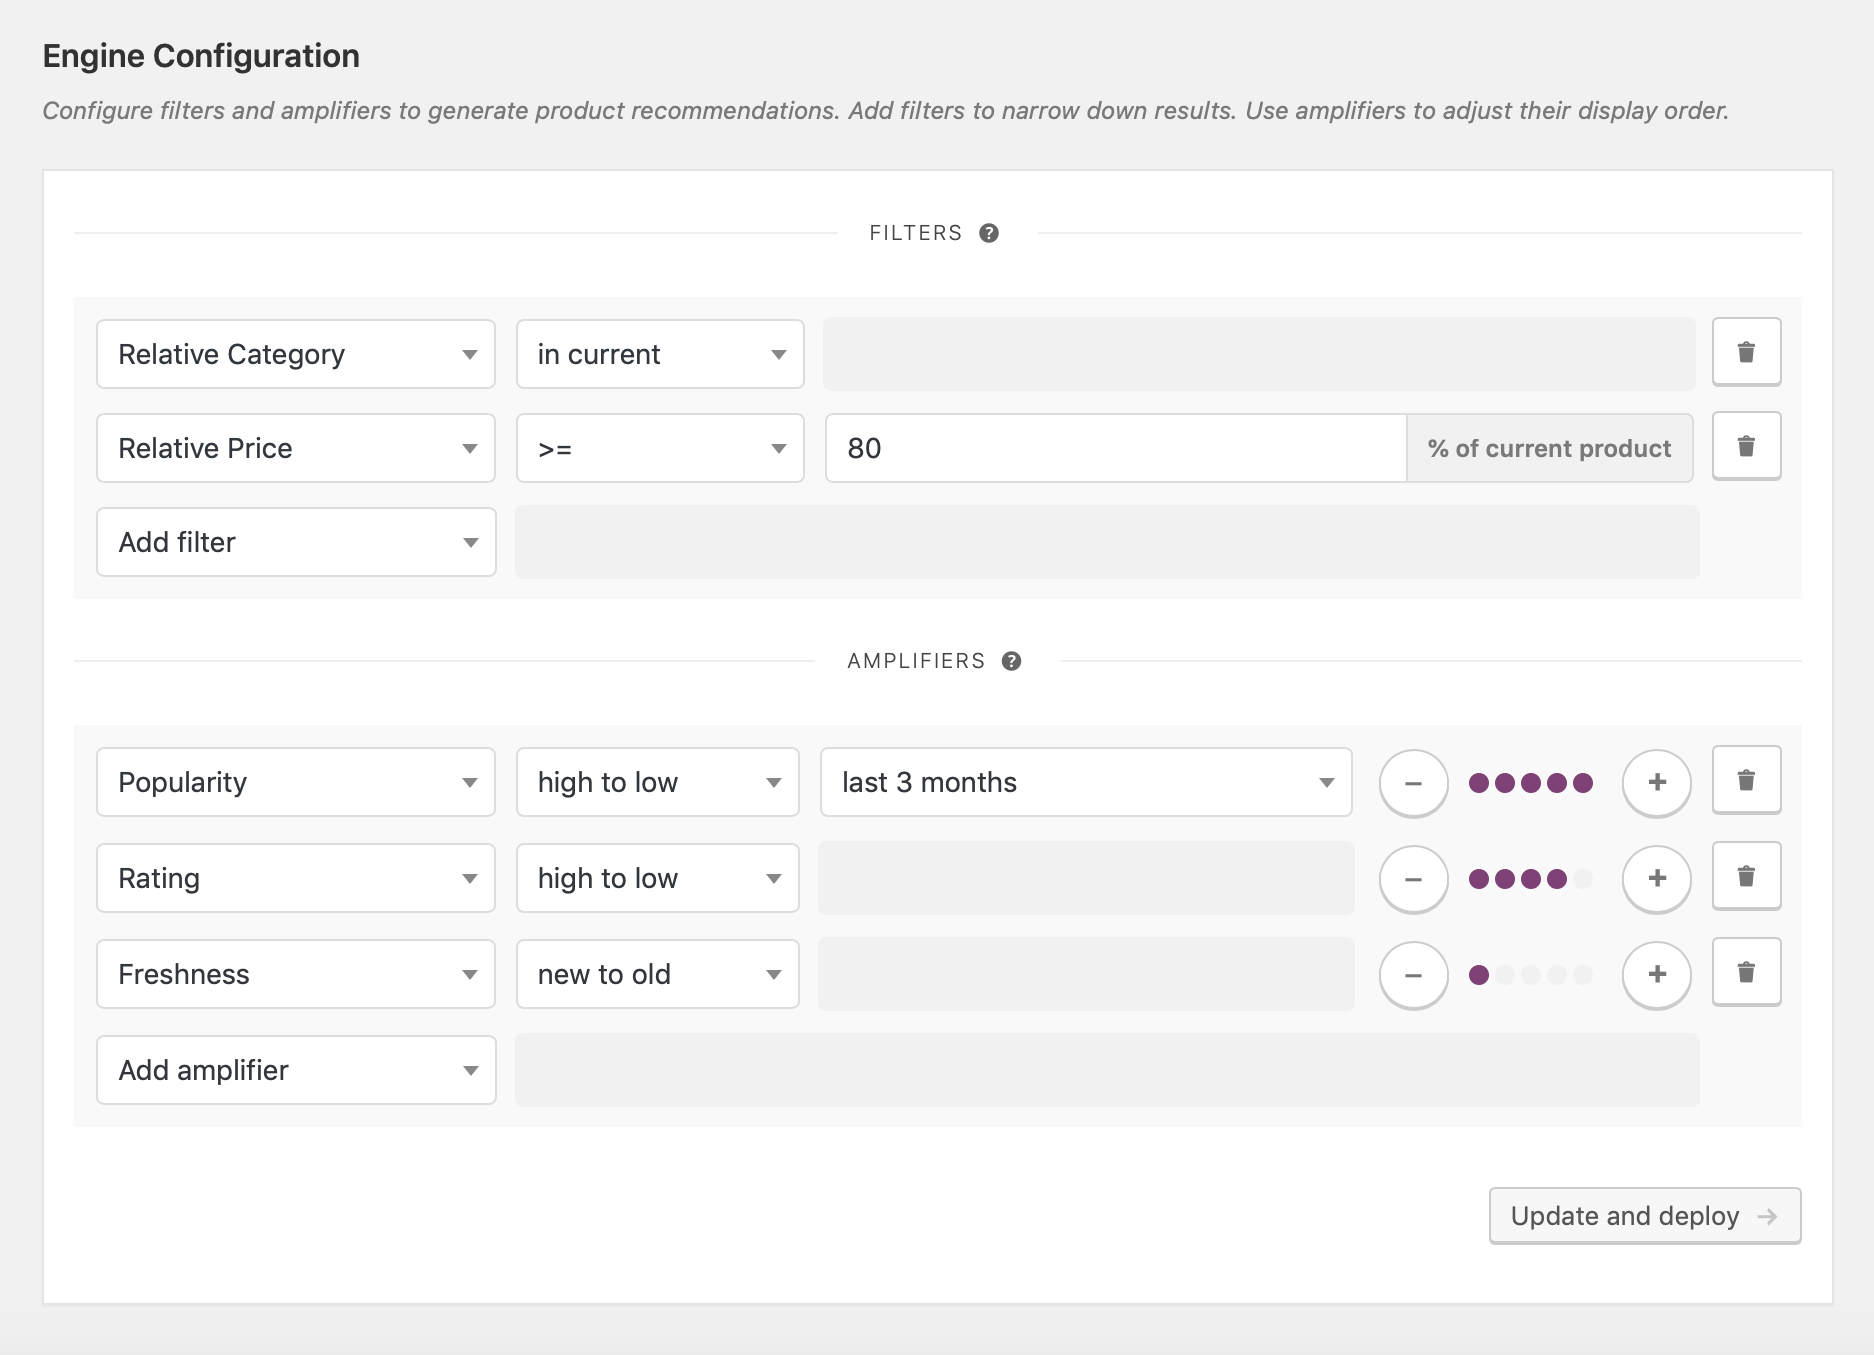 Use filters and amplifiers to create your own, custom recommendation engine.